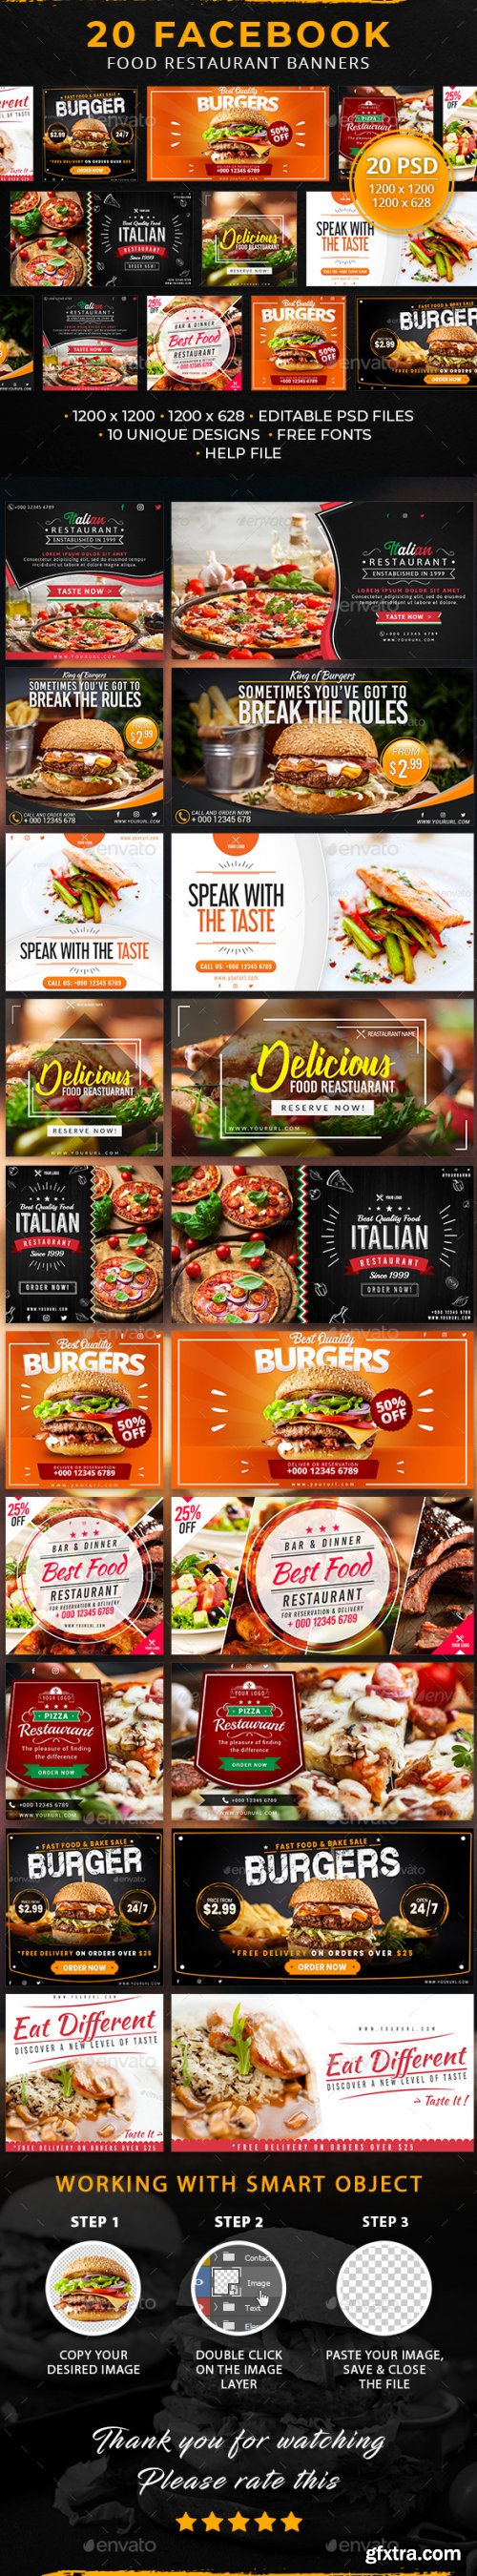 GraphicRiver - 20 Facebook Food Restaurant Banners 29392889